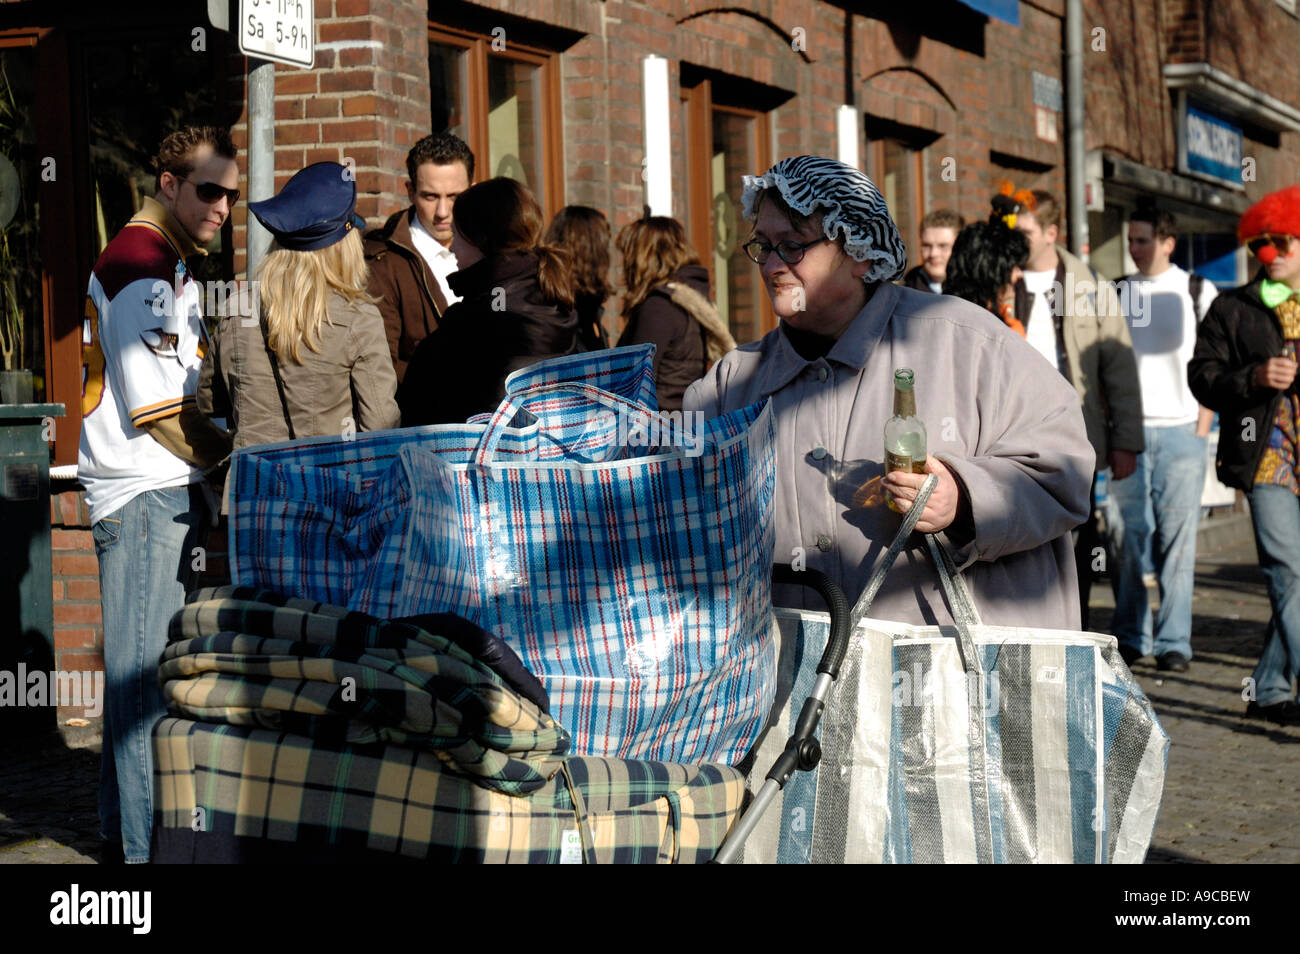 Carnival celebrations in Düsseldorf 2007. Woman collecting bottles with a pram. Stock Photo